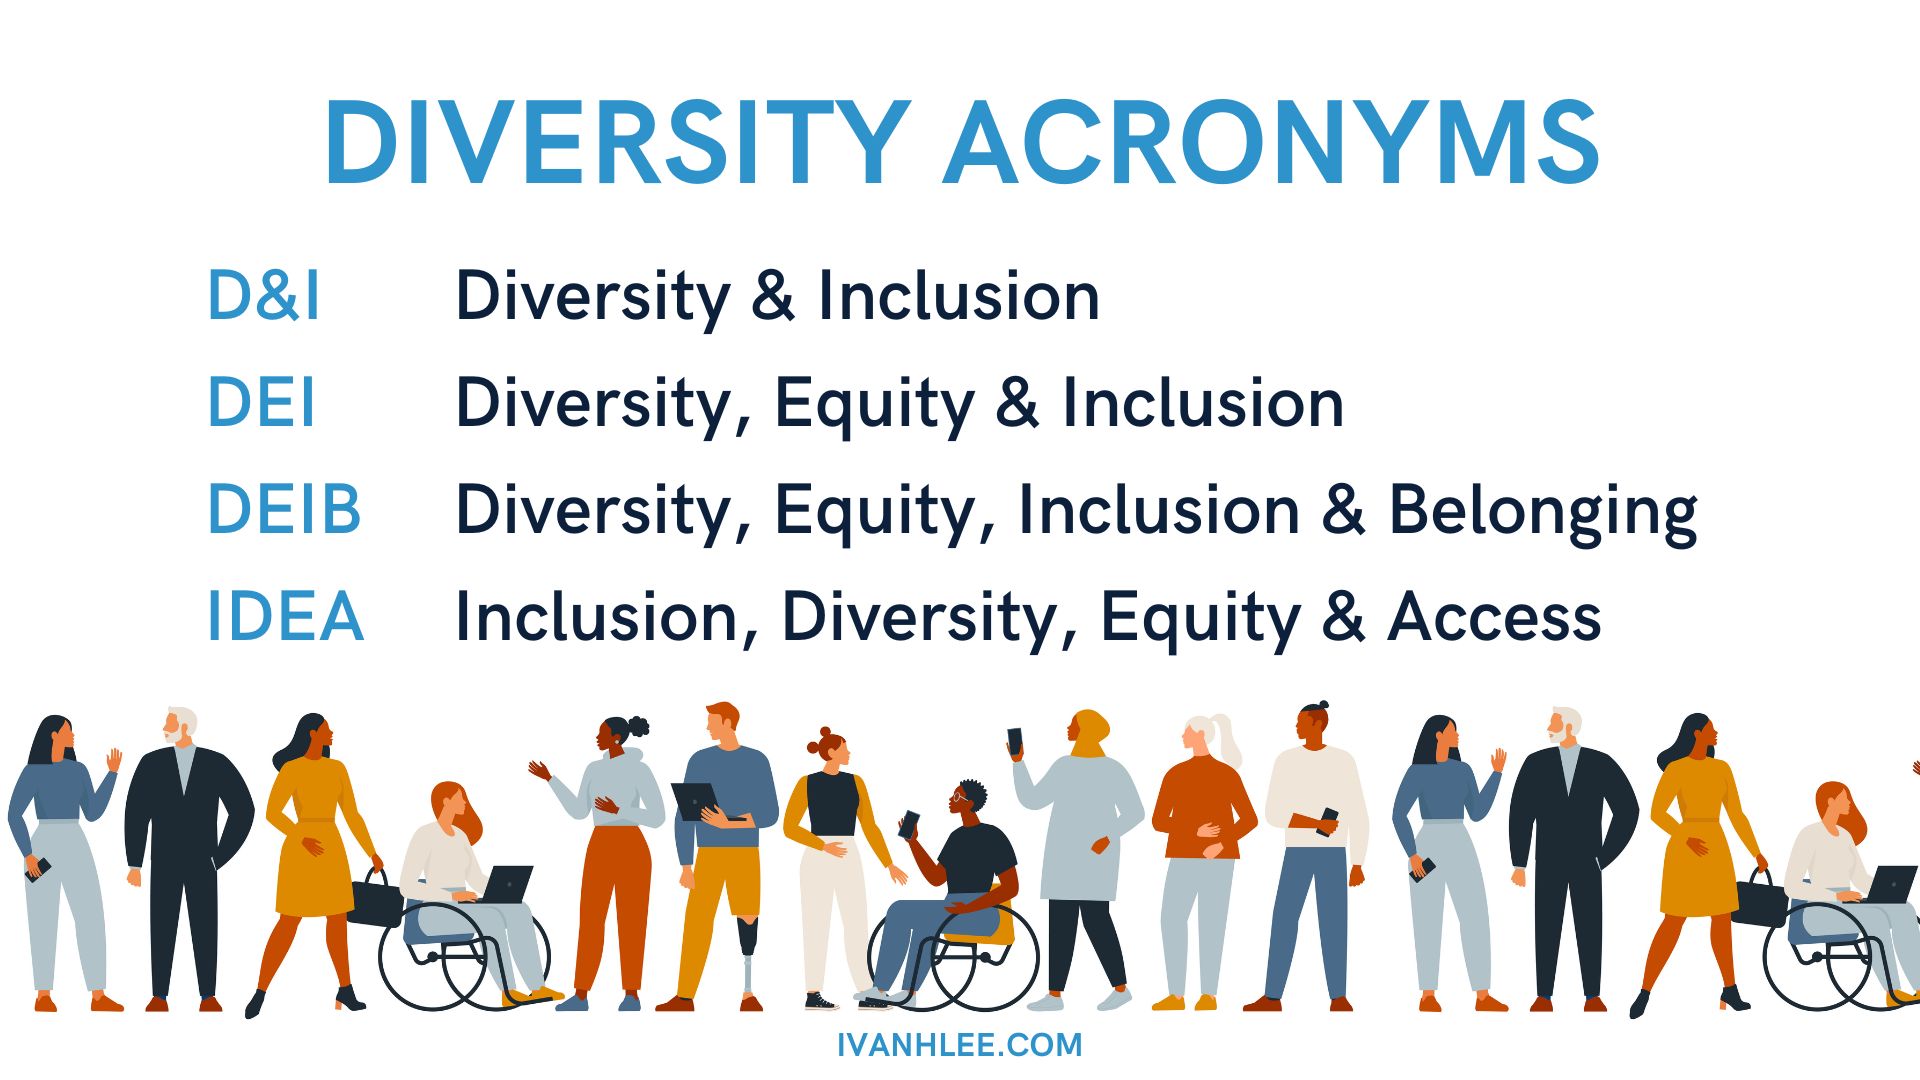 DEI, I&D, DEIB, or IDEA – Various Diversity Acronyms and What They Mean